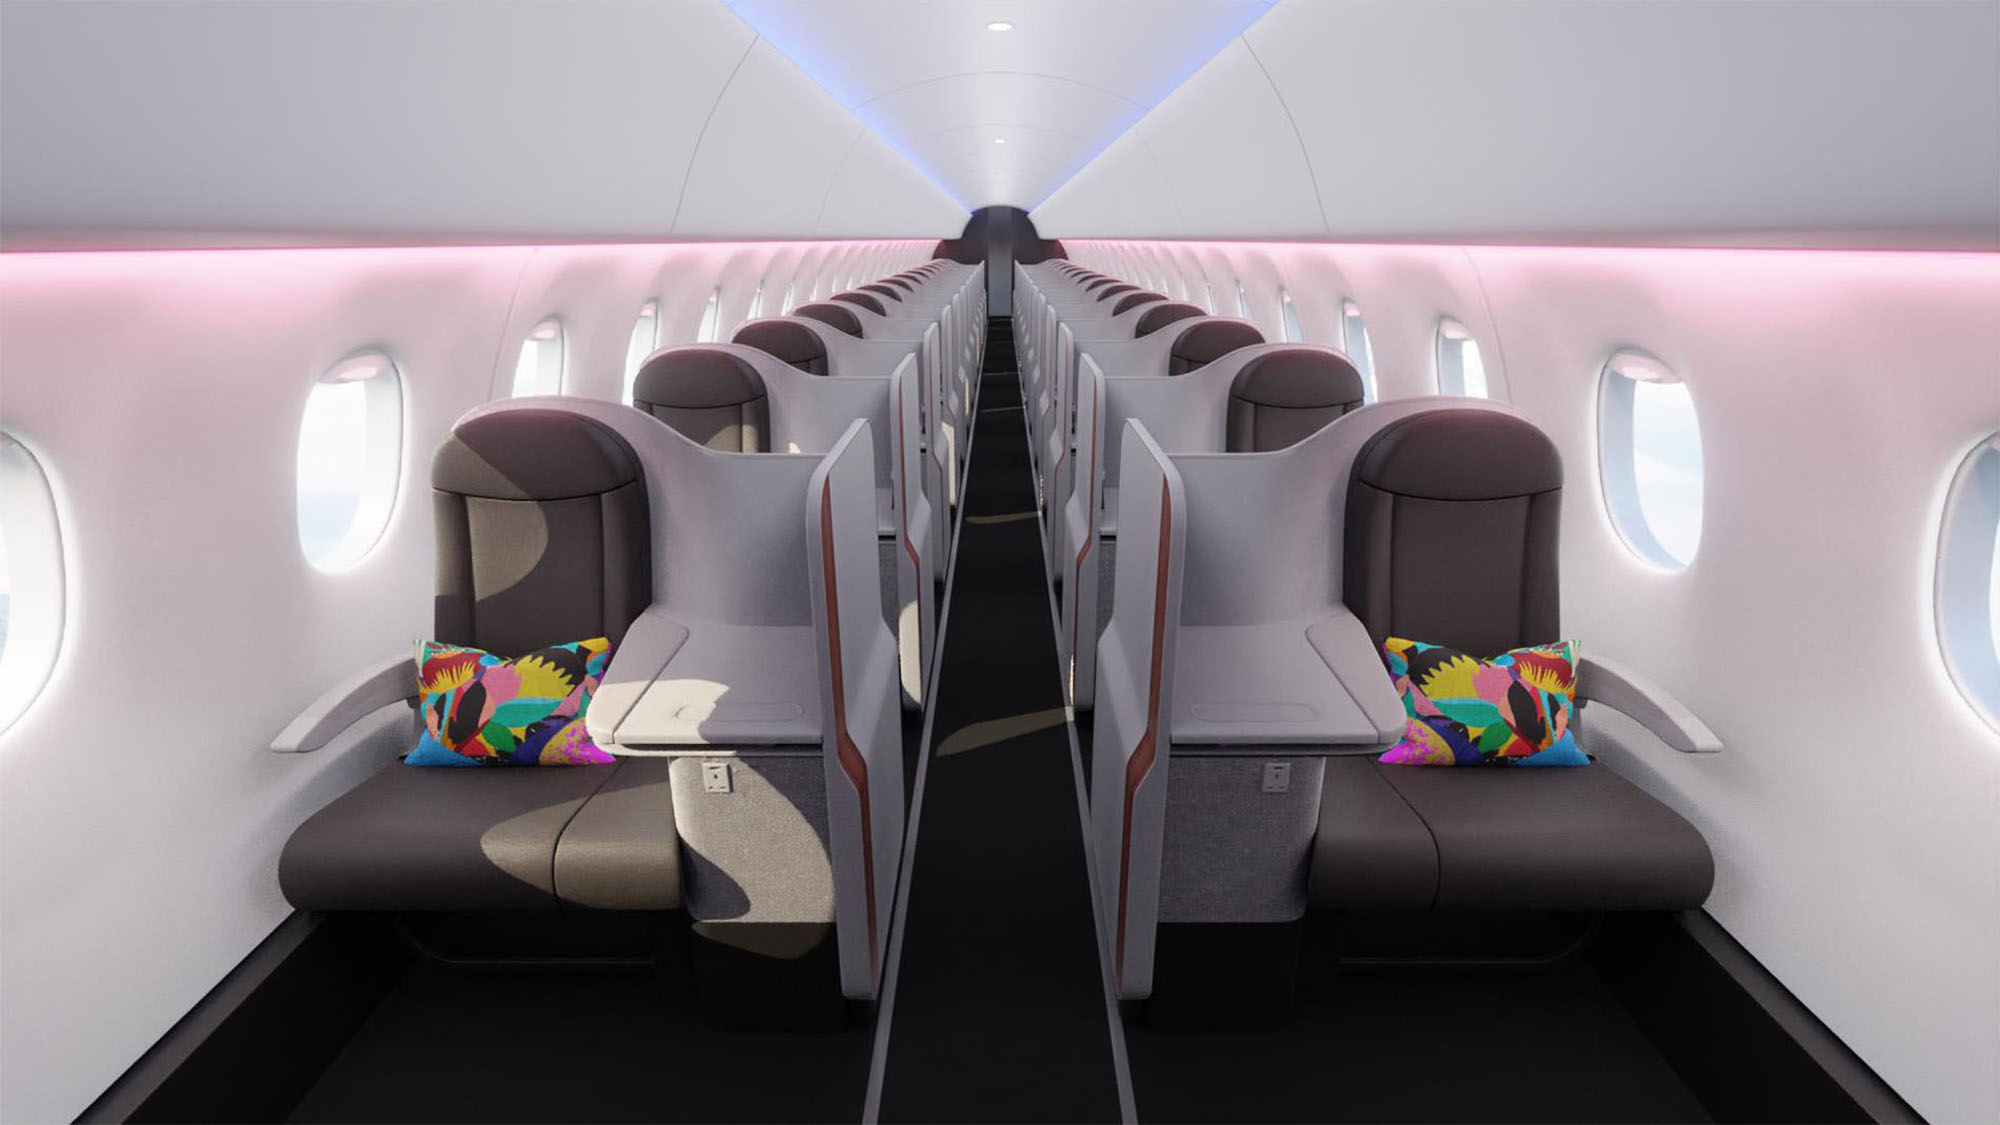 The Aisle Class seat configuration coming to BermudAir's retrofitted Embraer 175s.